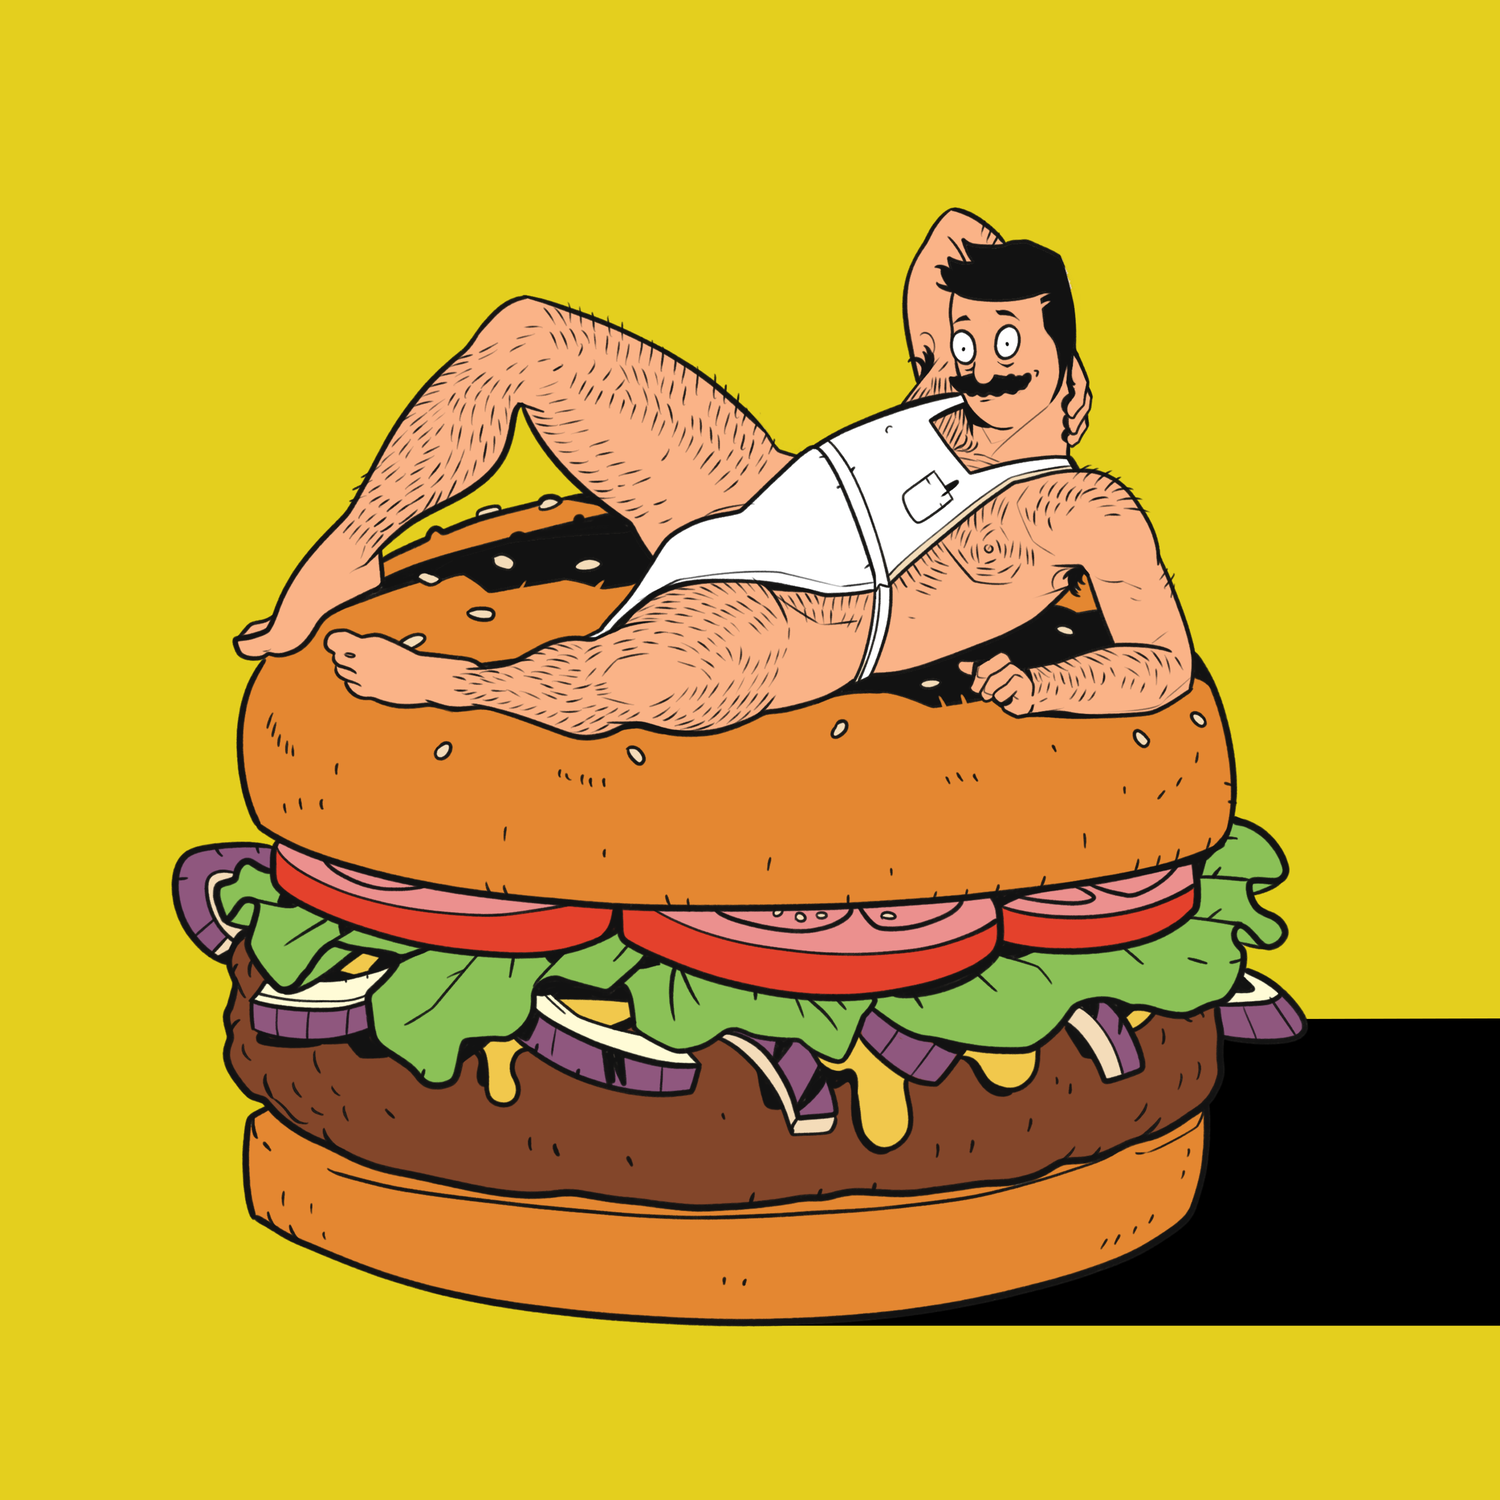 Bob of Bob's Burgers poses sexily on top of a giant burger wearing only an apron and lots of body hair